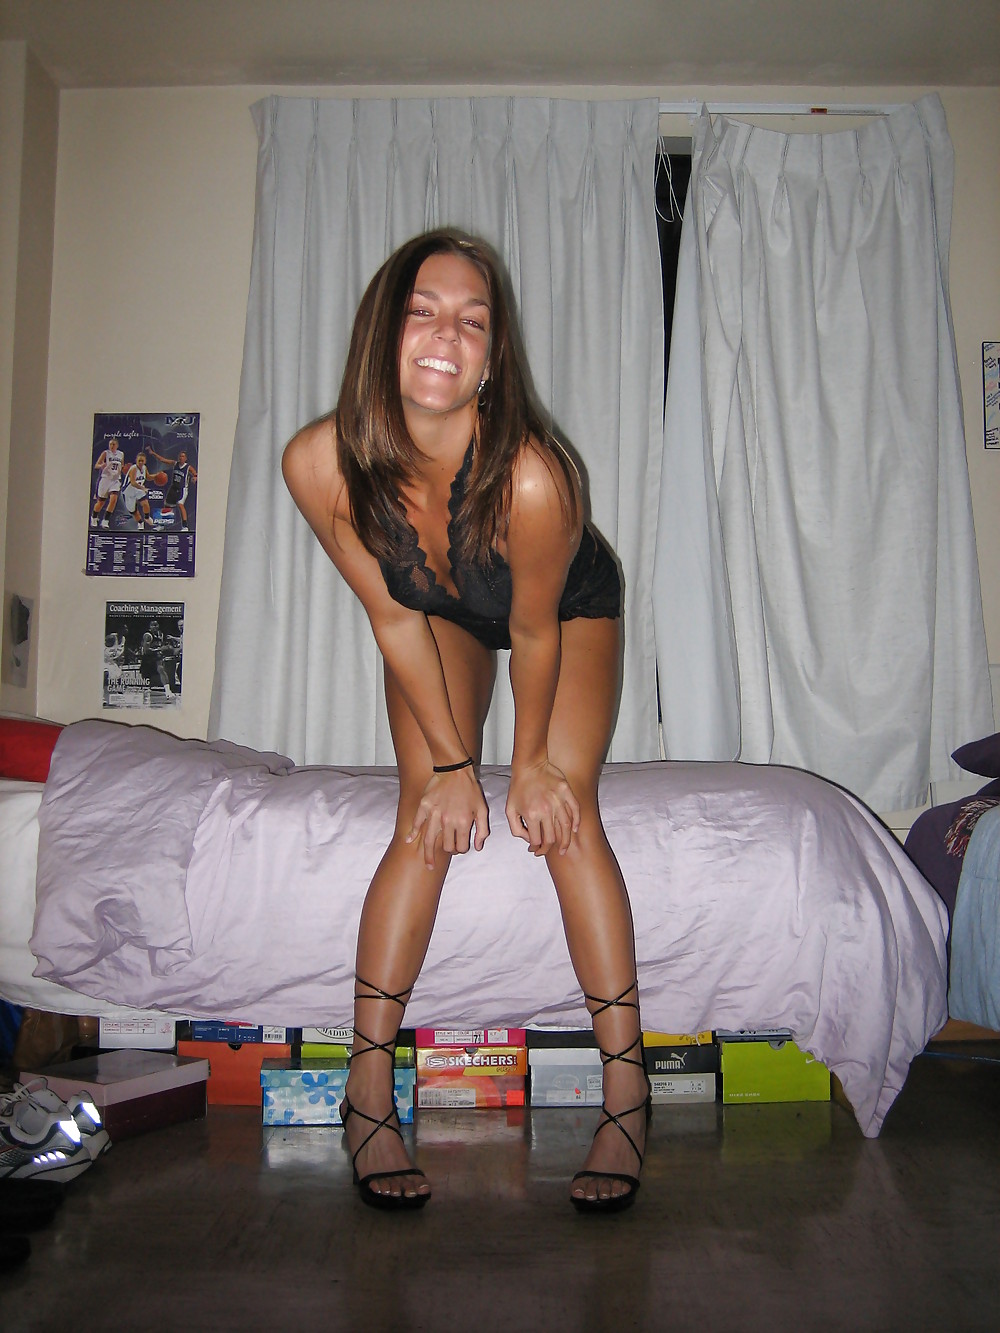 Girl shows her long legs and more - N. C. adult photos